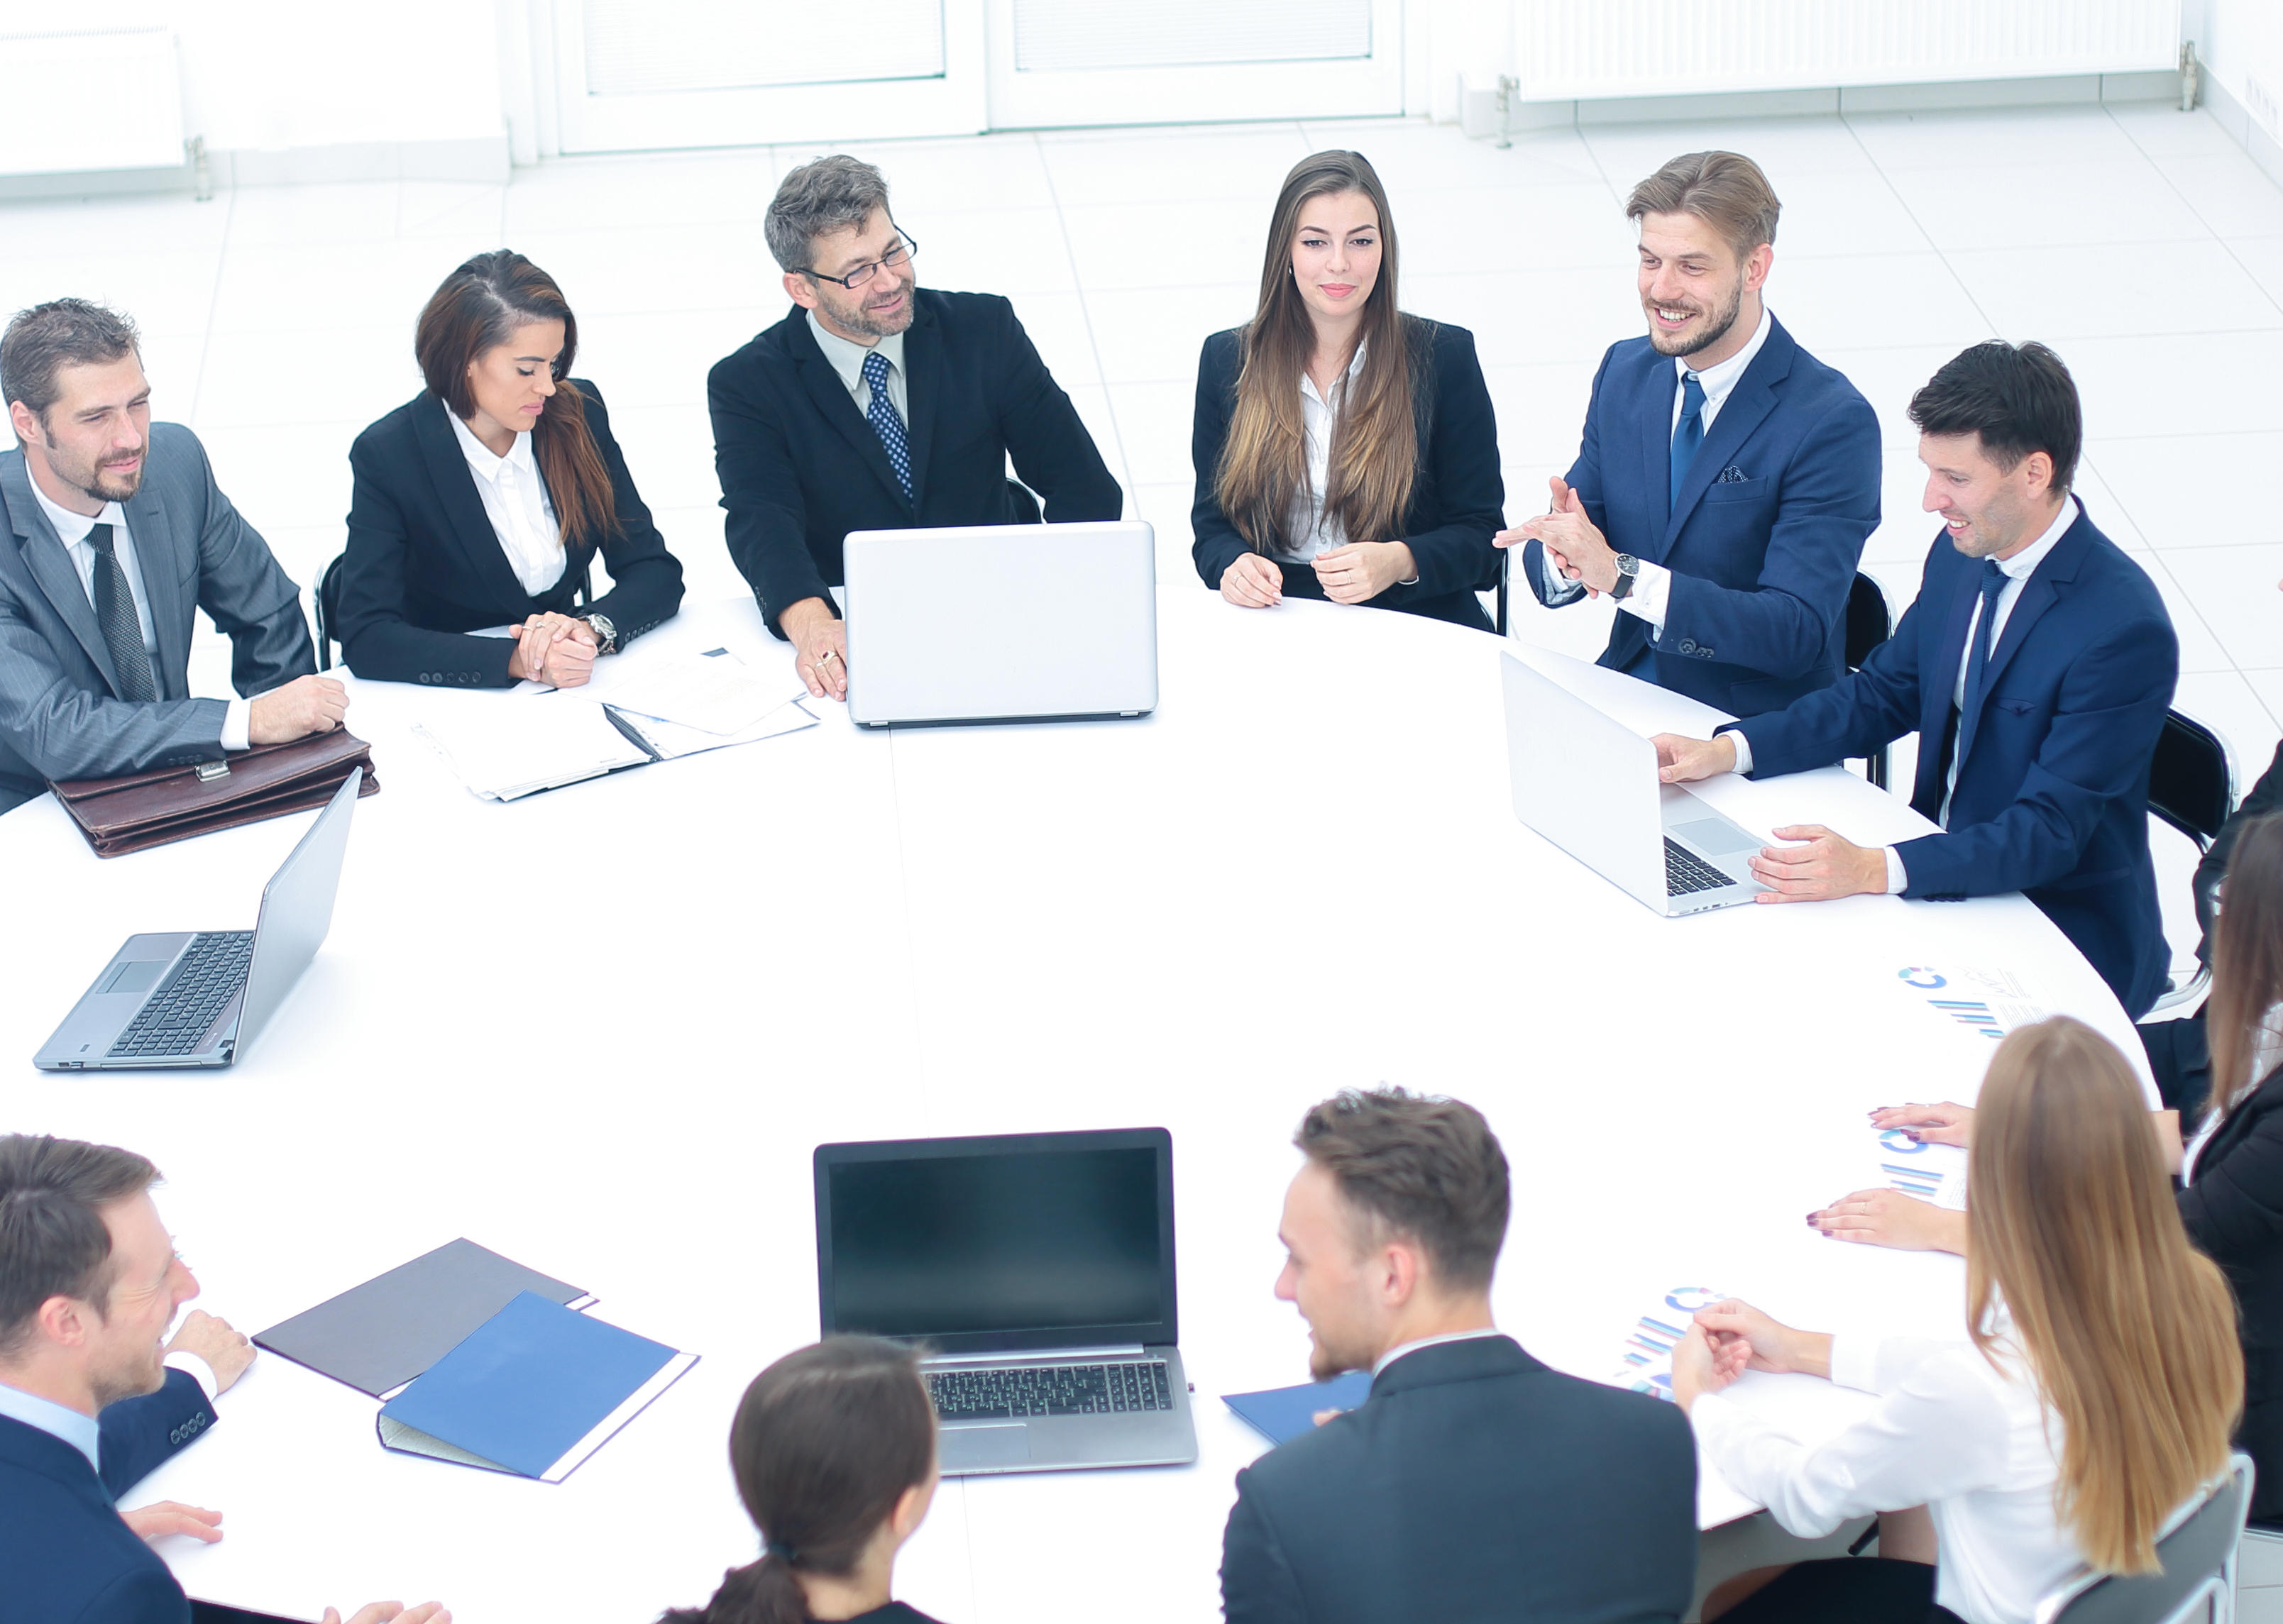 boss gathered his team for a round table to discuss a new projec